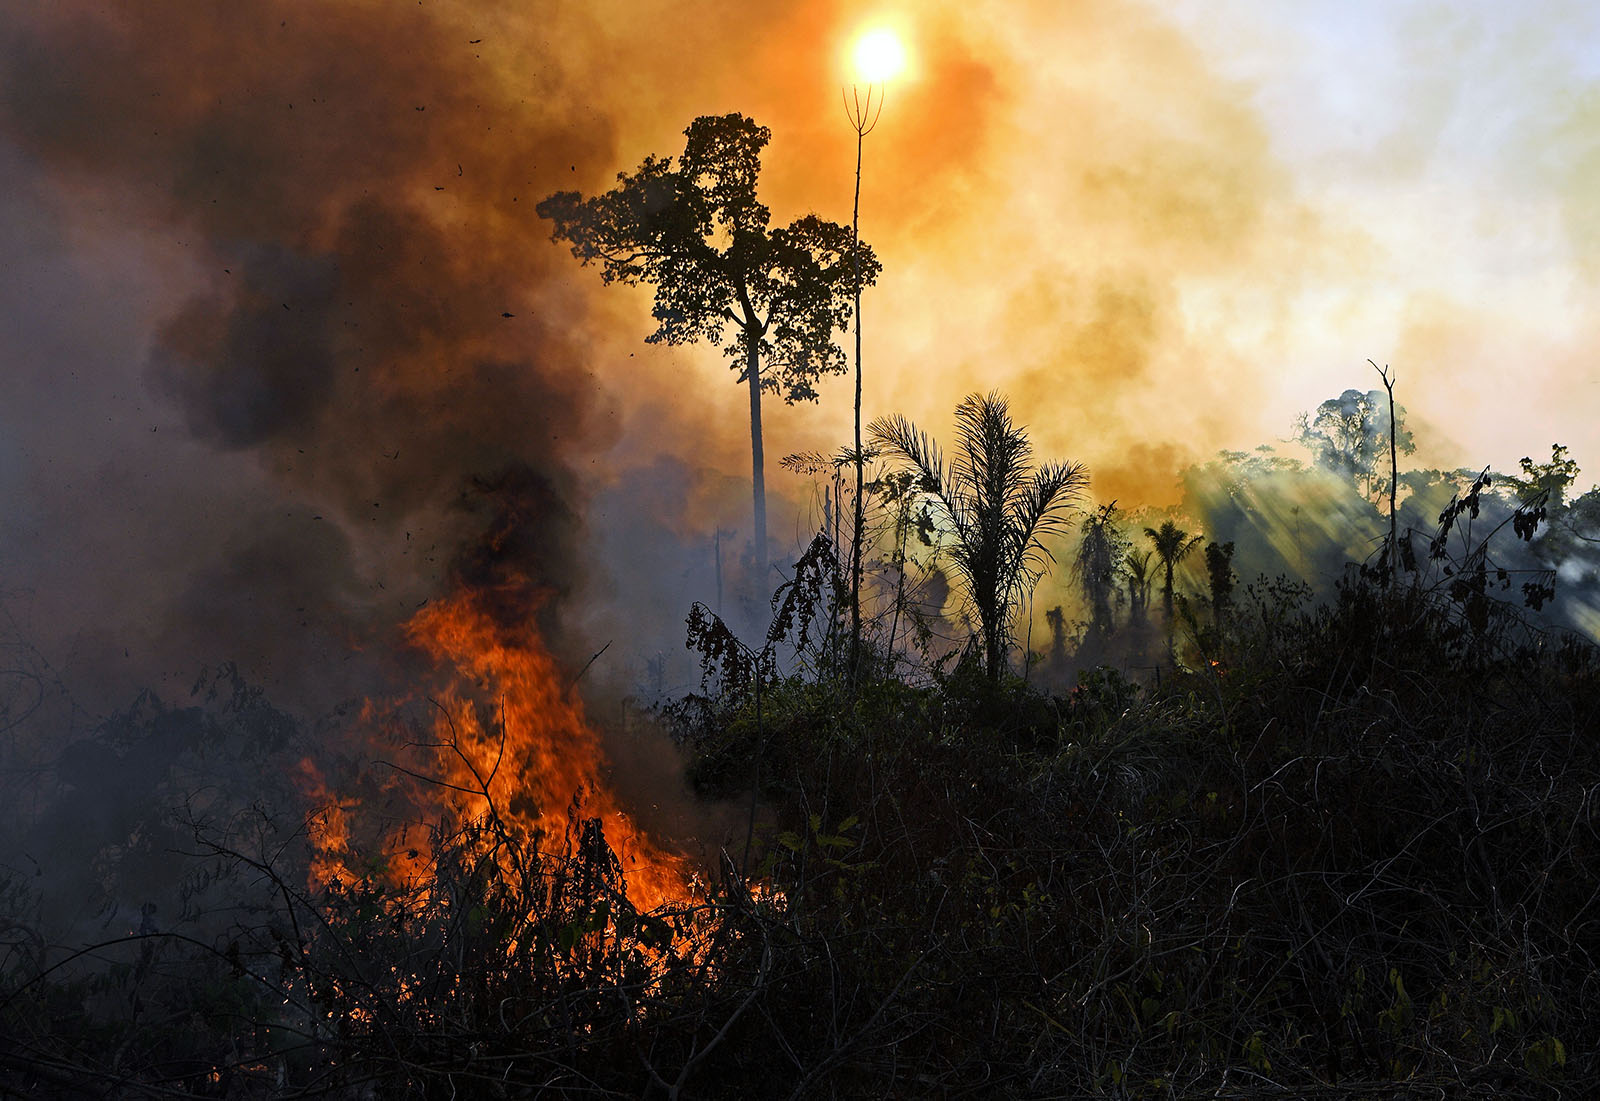 Brazil redoubles efforts to combat fires in the Amazon